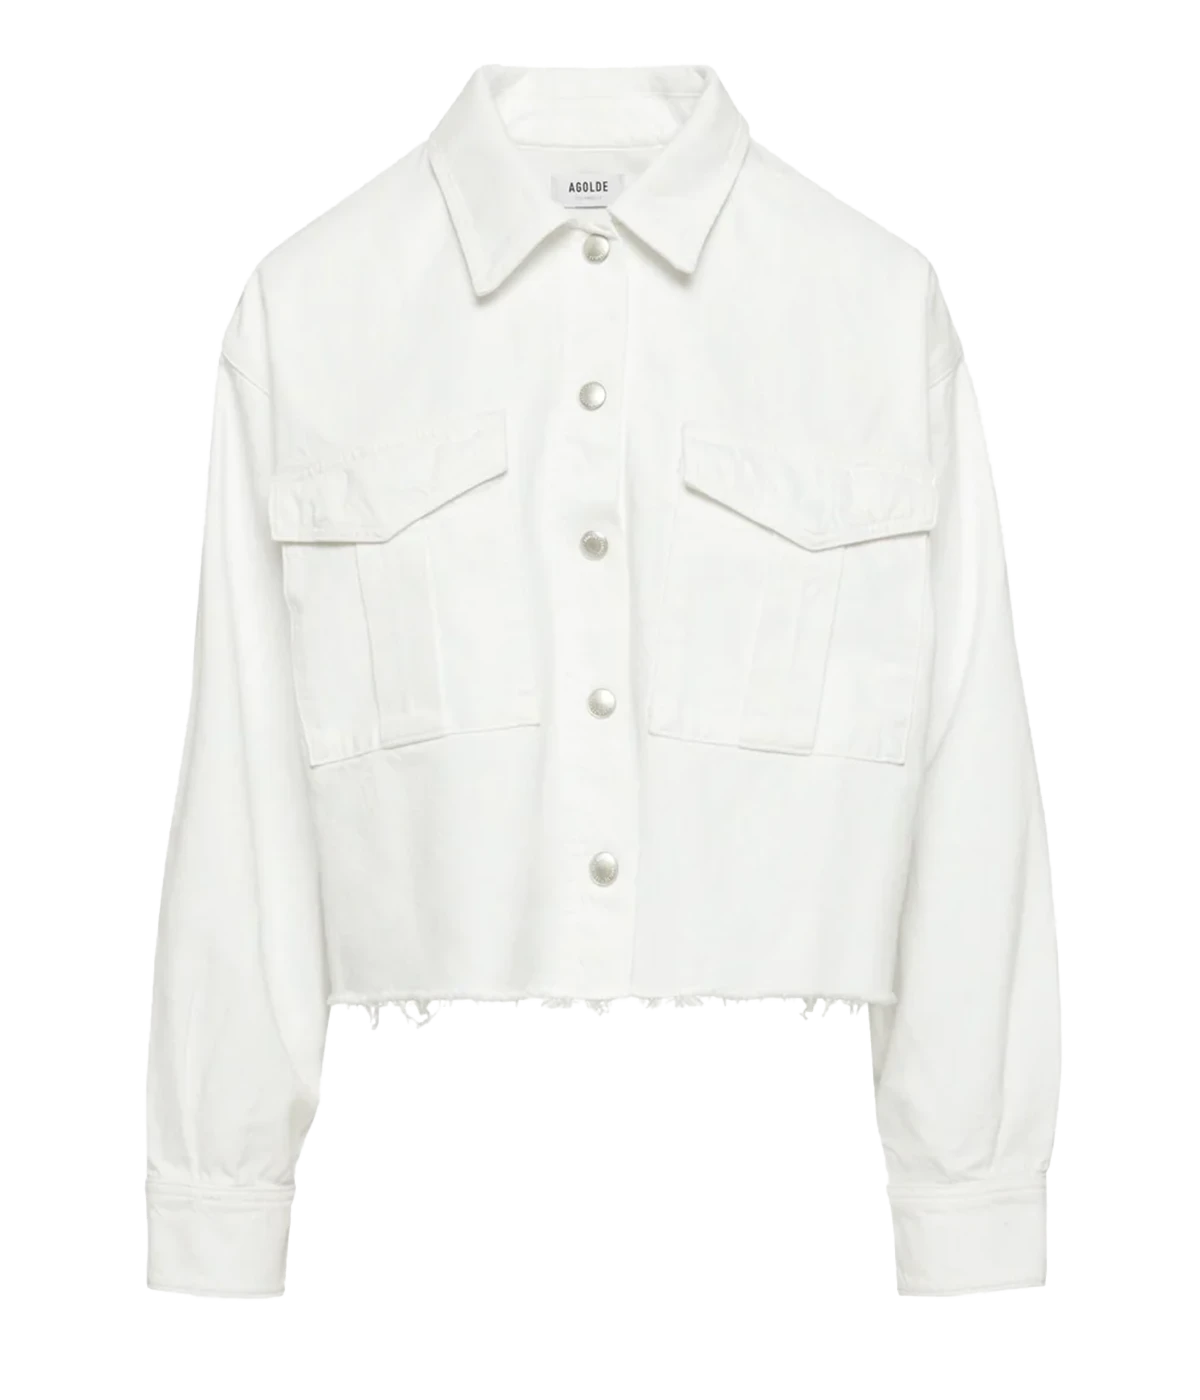 A trendy cropped denim shirt jacket in white, featuring a raw hem, long sleeves, front pocket detail and collar detailing. Summer throw on and go, rigid denim, casual denim jacket, comfortable, made in USA, bra friendly, organic cotton.